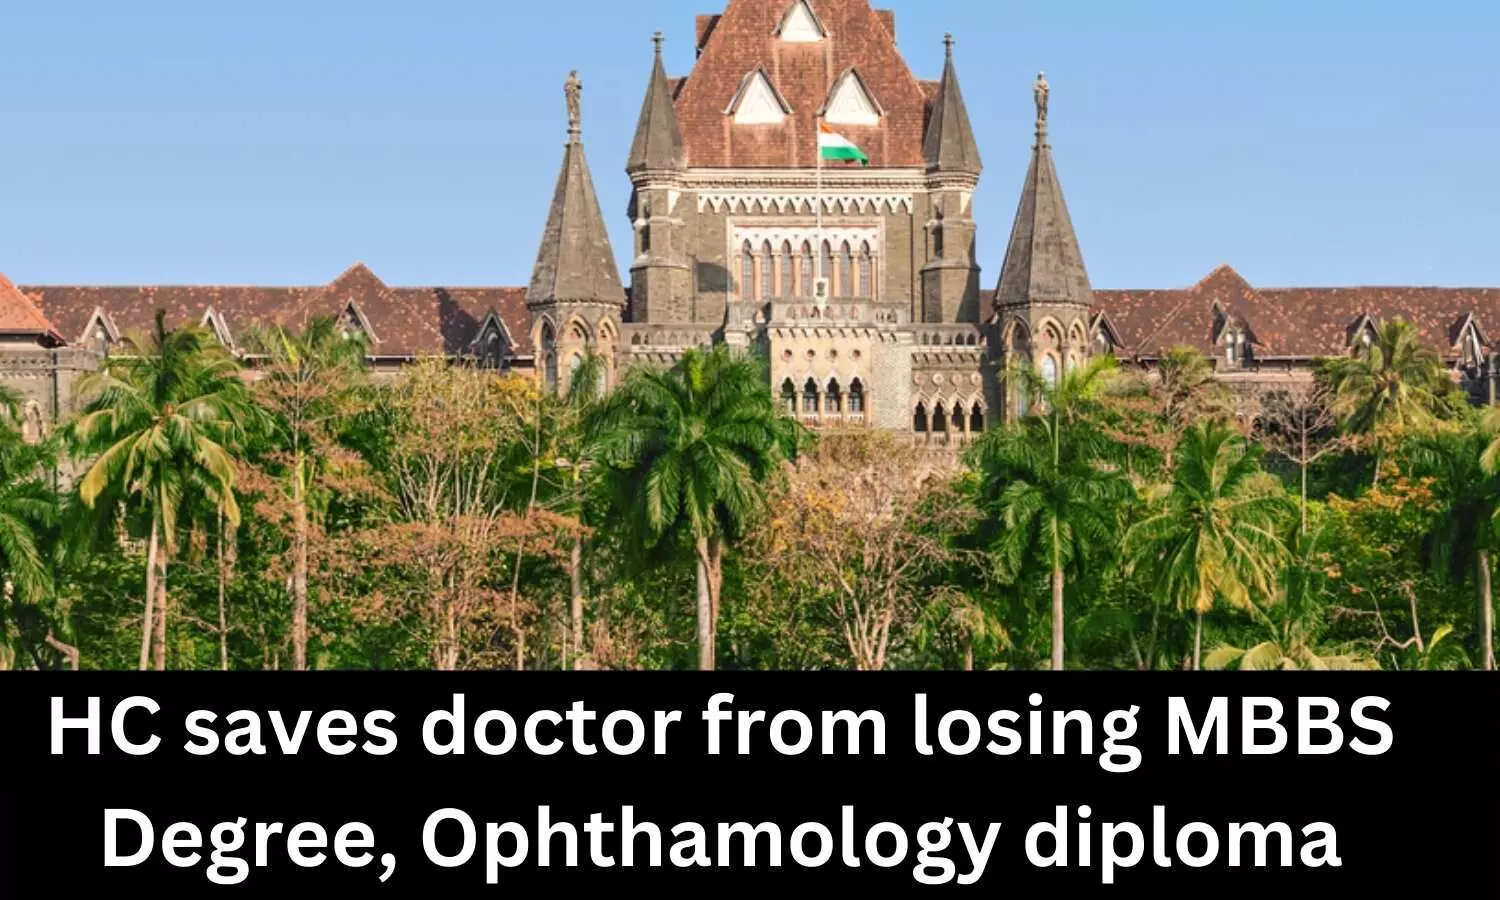 HC saves doctor from losing MBBS degree, ophthalmology diploma